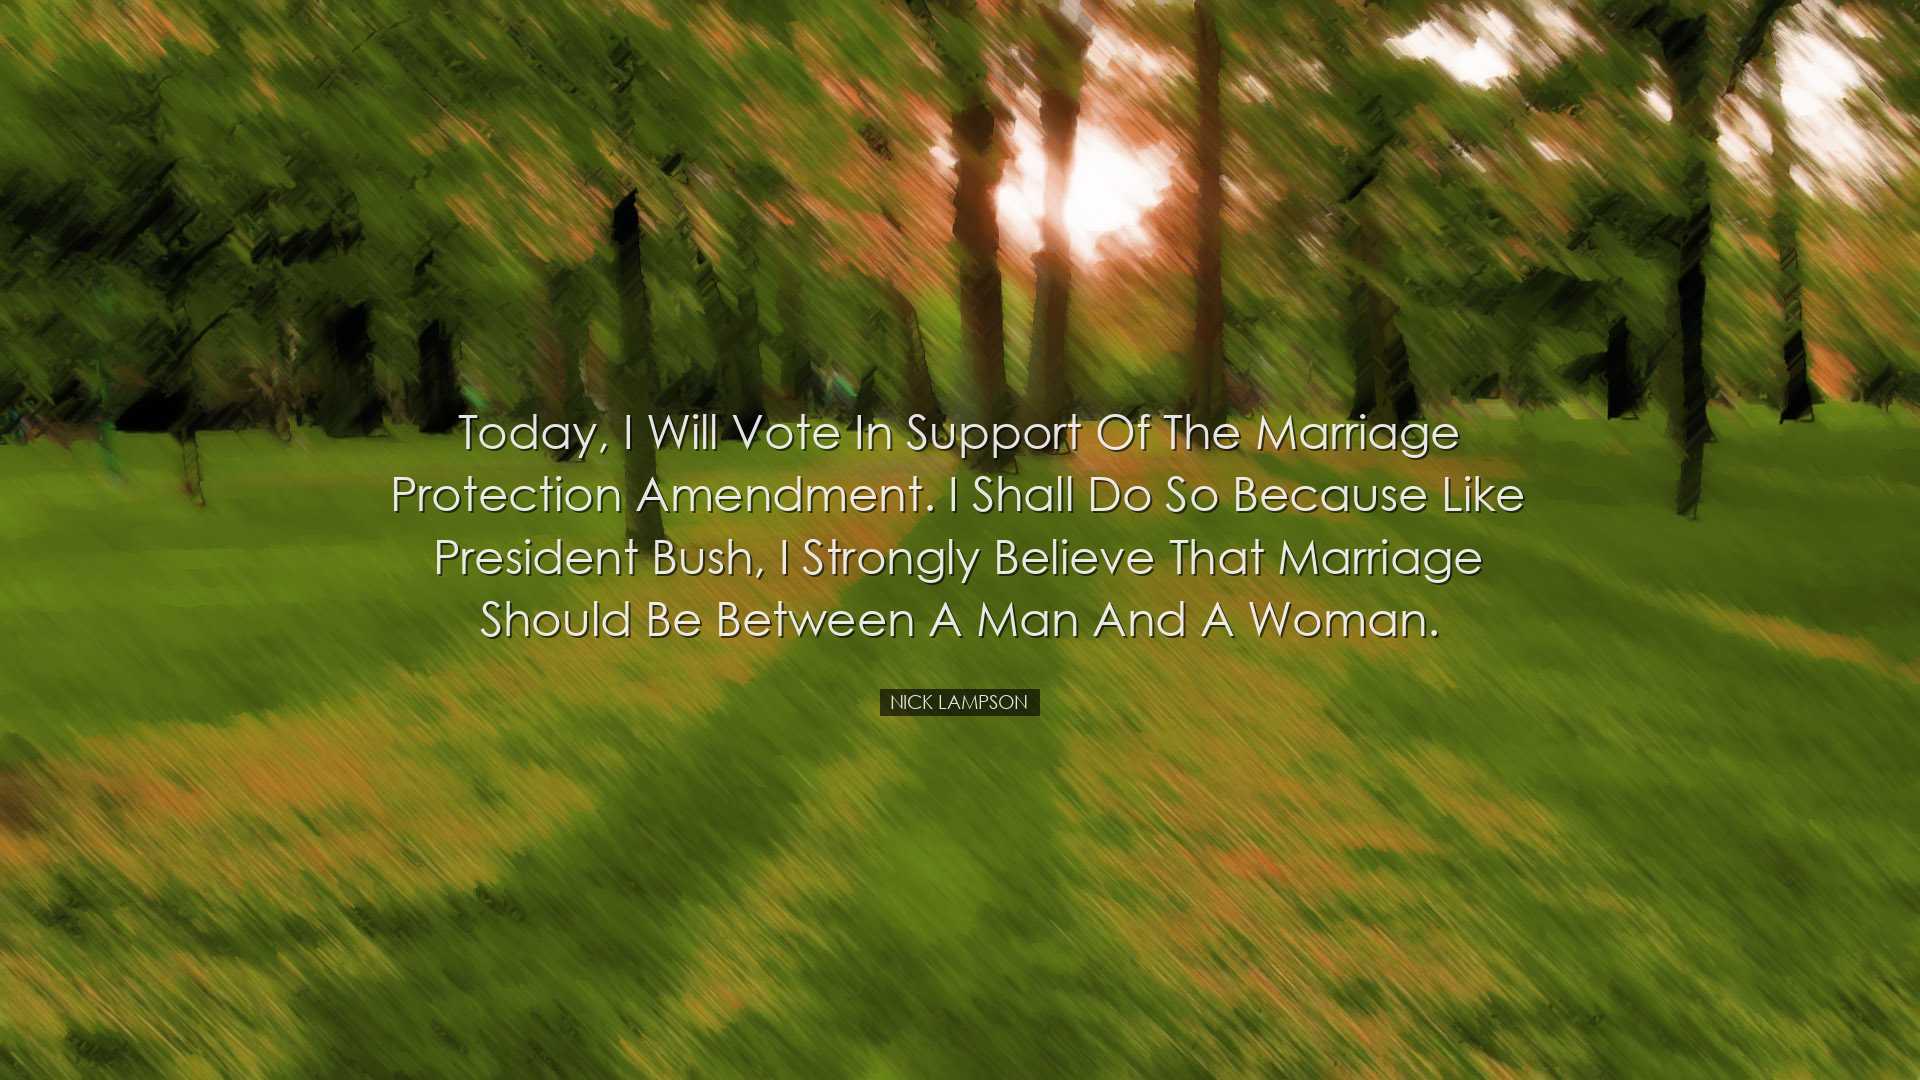 Today, I will vote in support of the Marriage Protection Amendment